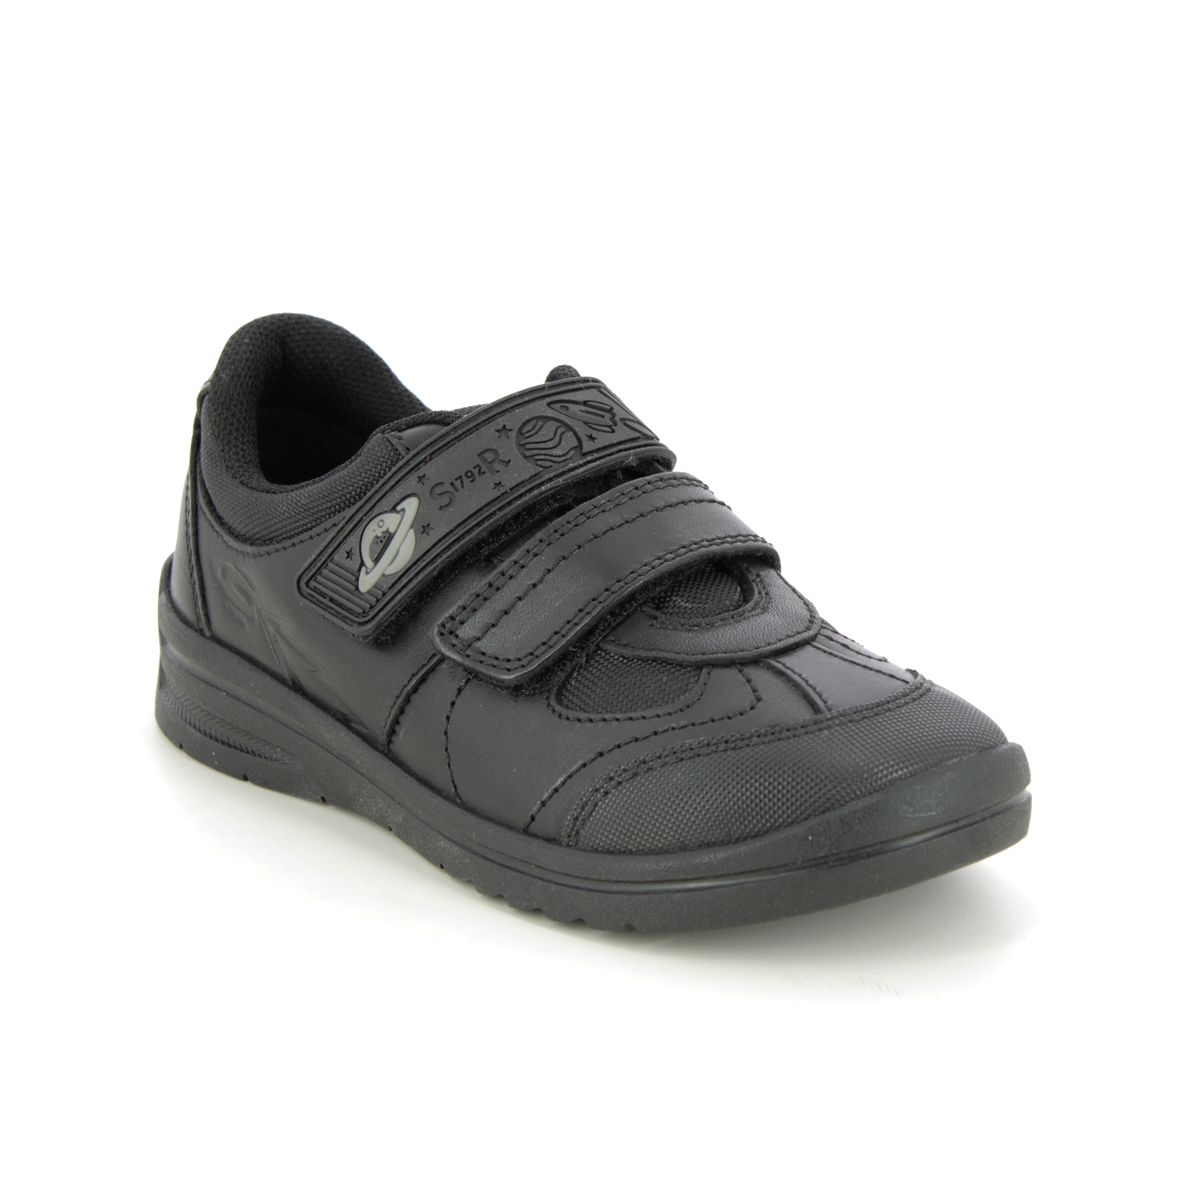 Start Rite - Rocket 2V In Black Leather 2797-75E In Size 1 In Plain Black Leather For School Boys Shoes  In Black Leather For kids